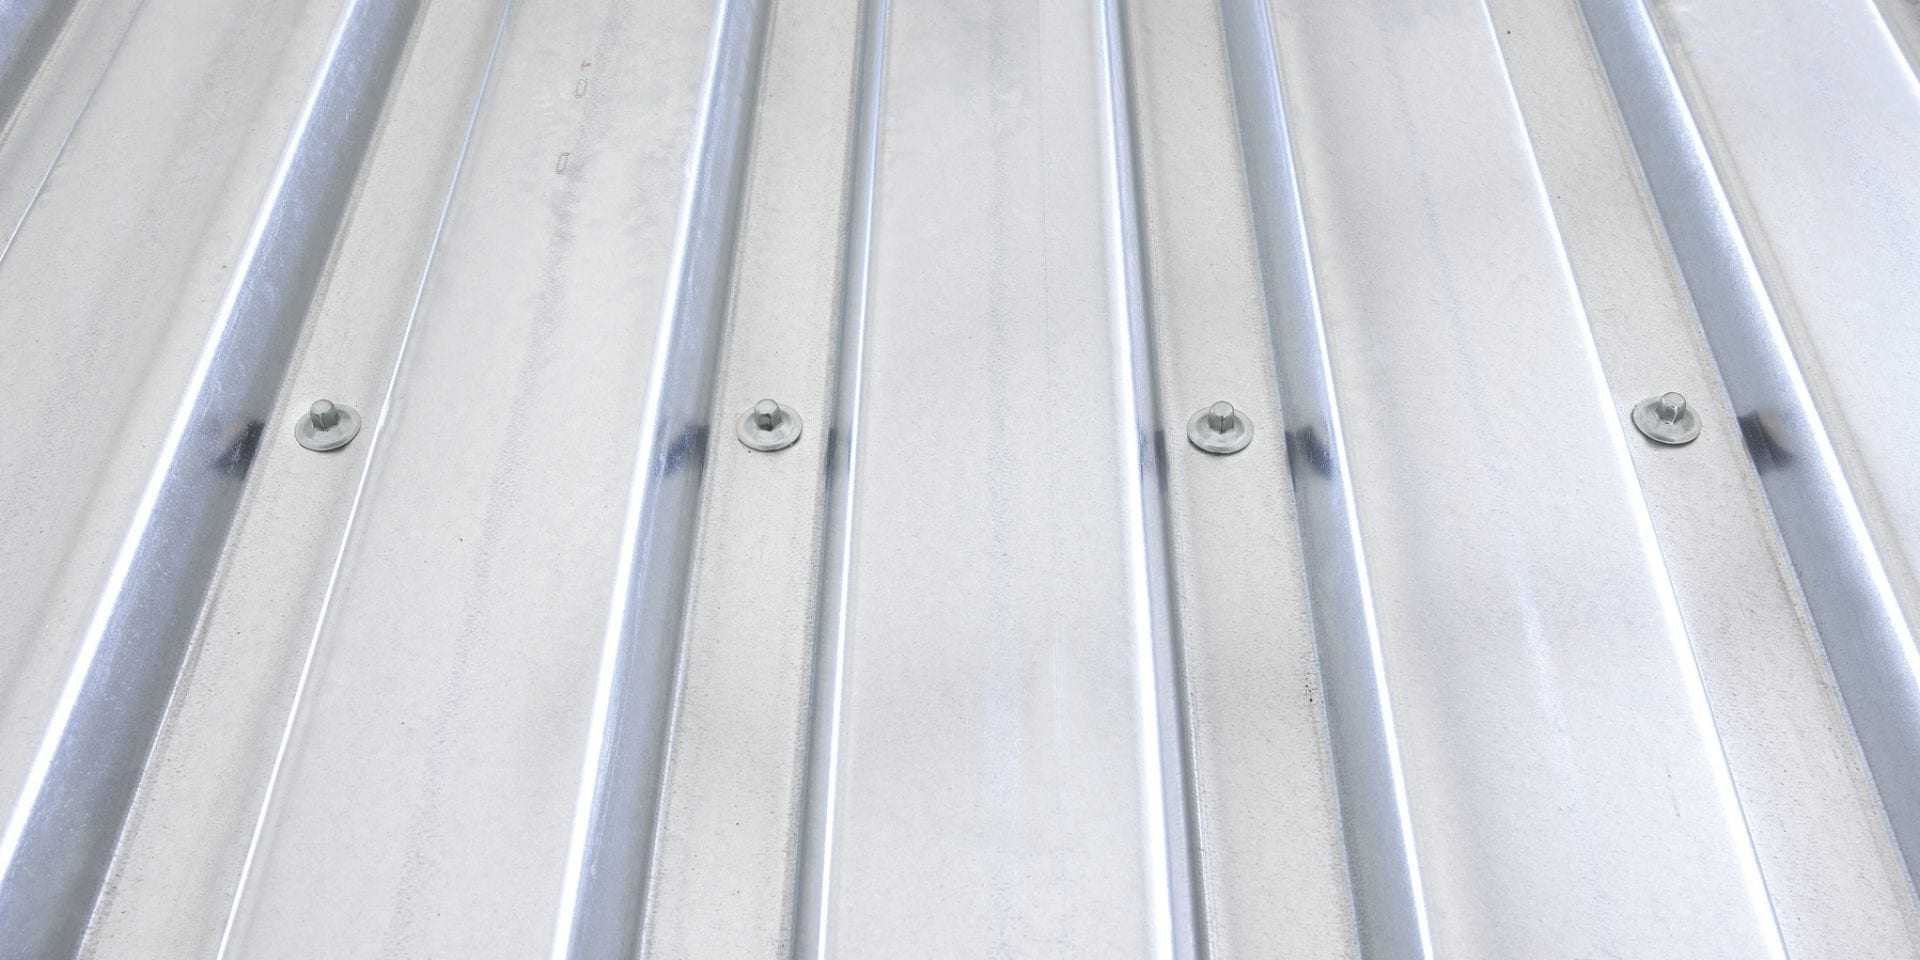 Fastening roofing and flooring metal sheet to structural steel beams